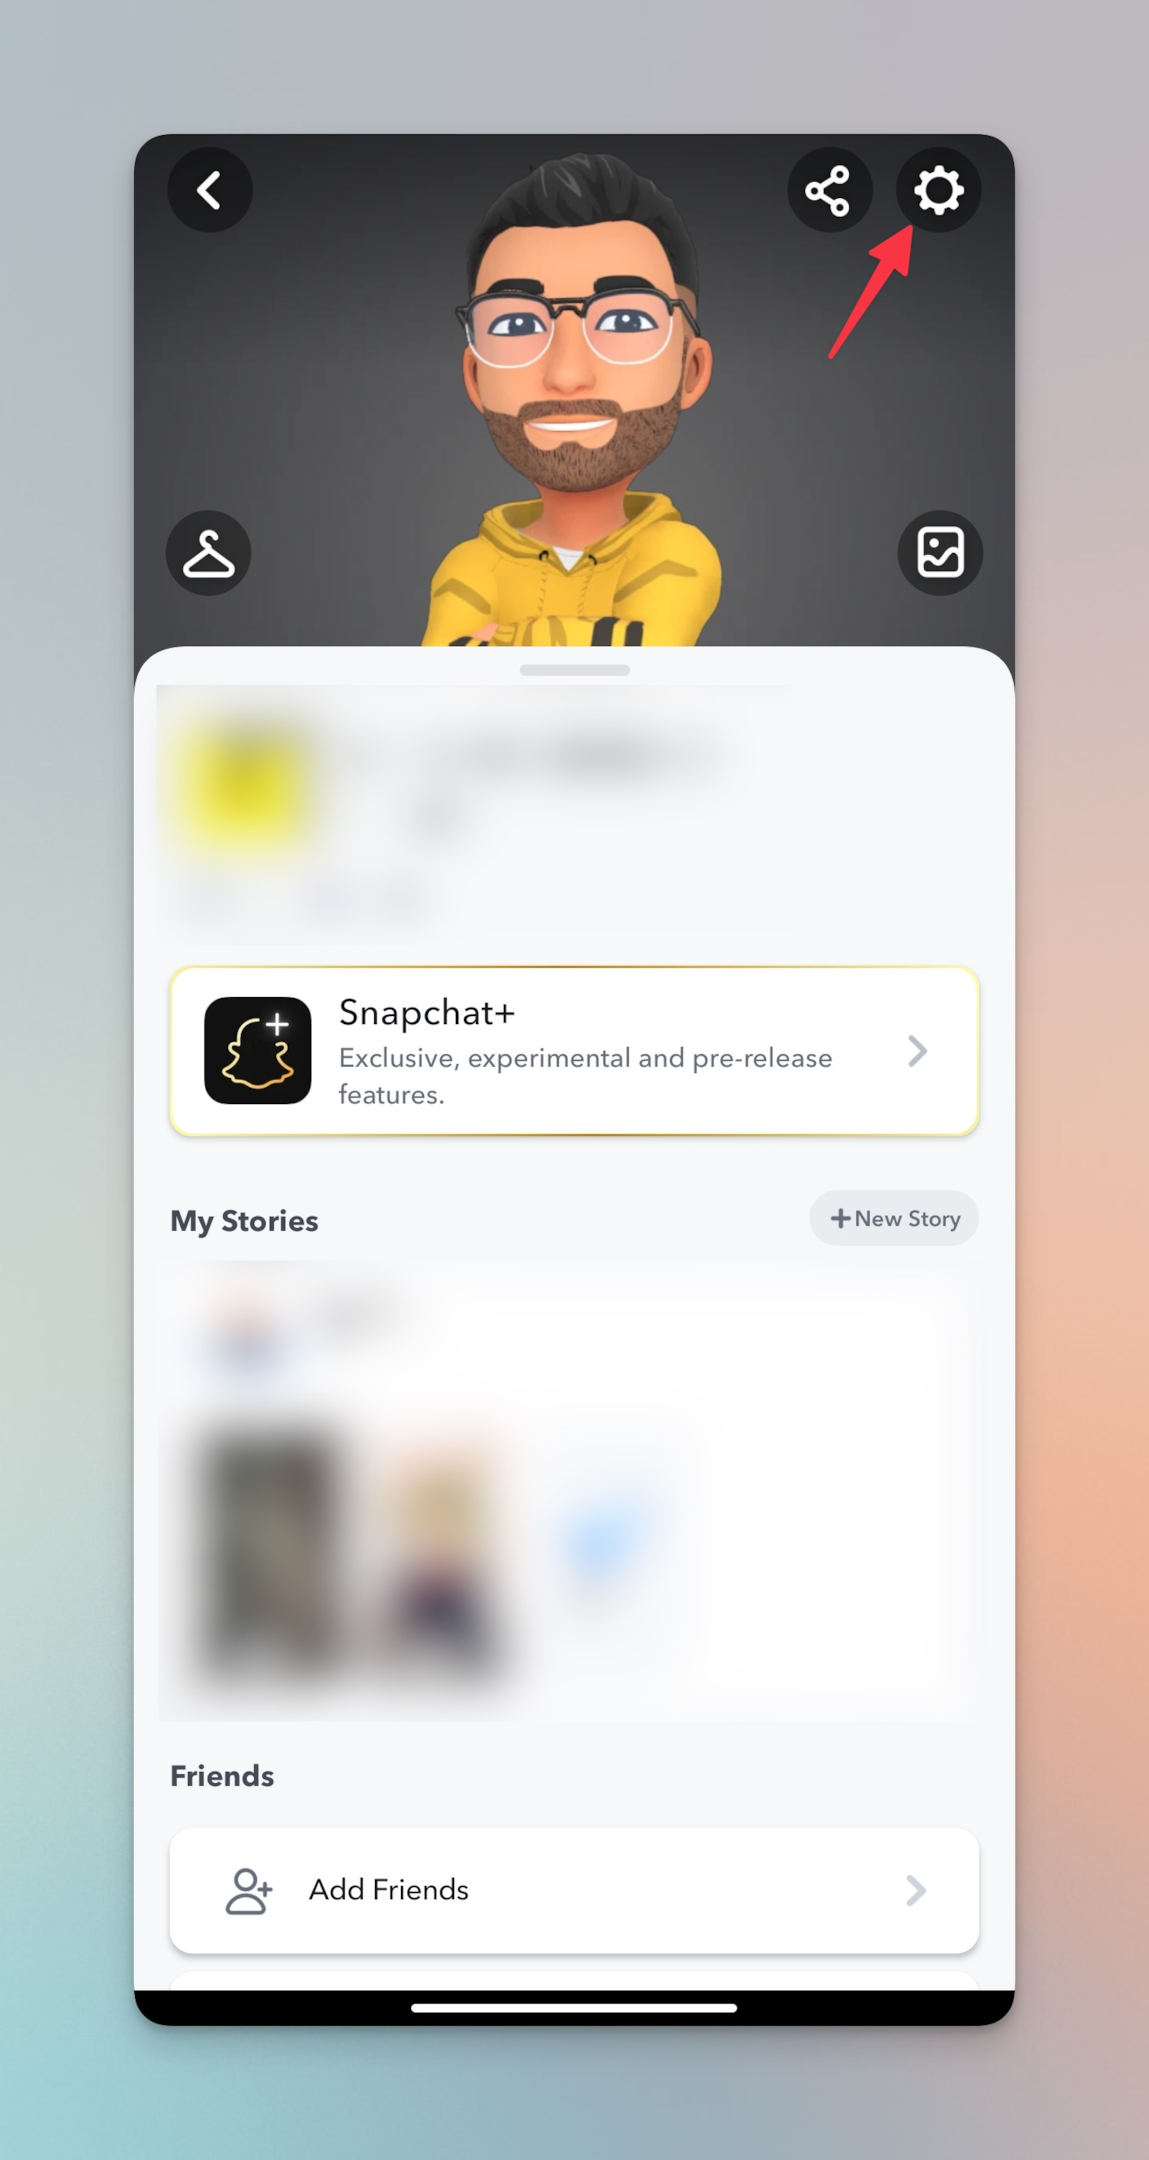 Remote.tools pointing to the gear icon on Snapchat profile page of the person owning the Snapchat account